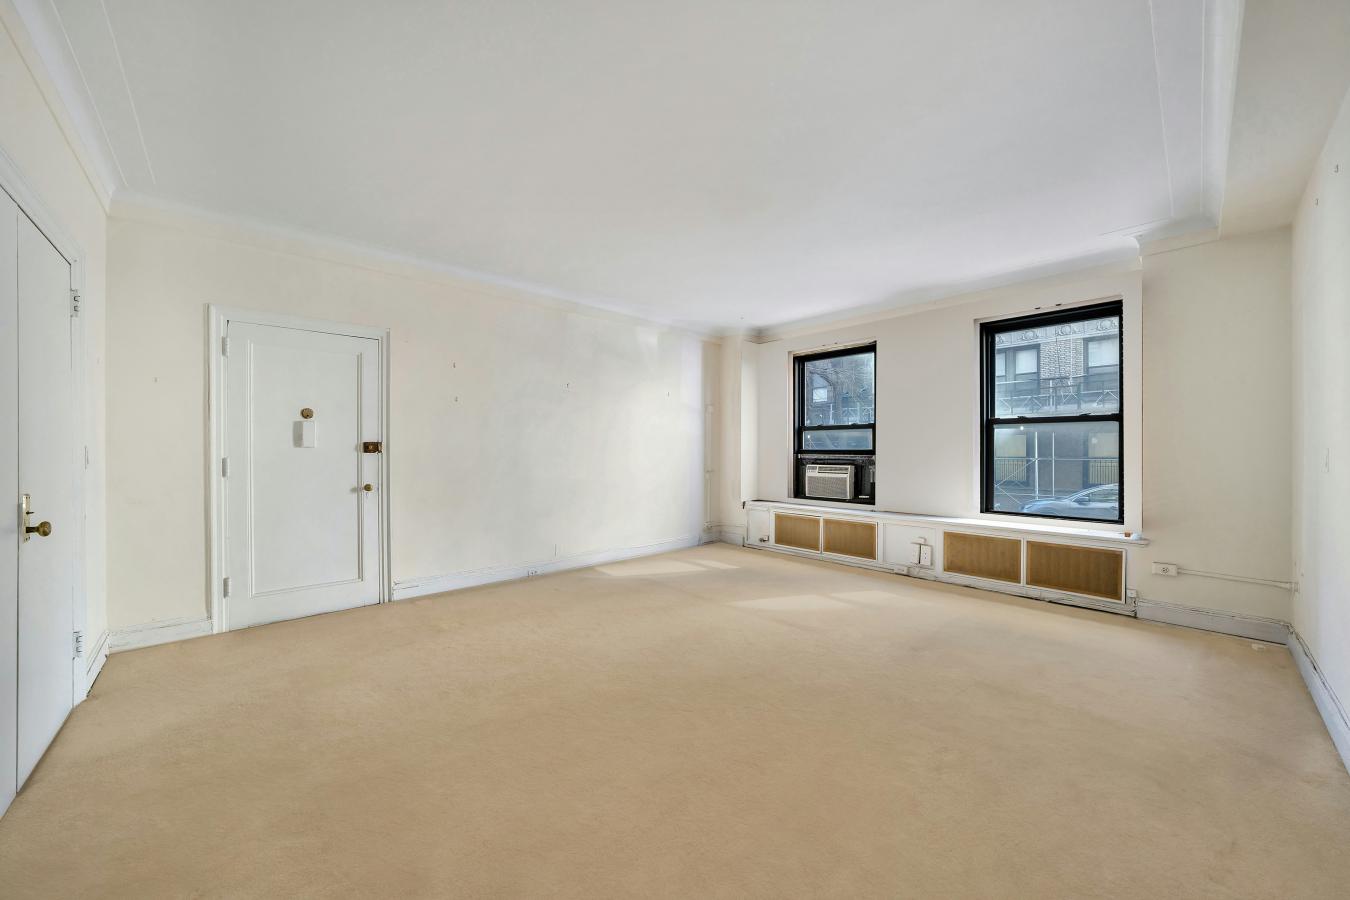 262 CENTRAL PARK WEST, New York, New York, 10024, United States, ,1 BathroomBathrooms,Residential,For Sale,262 CENTRAL PARK WEST,1483633